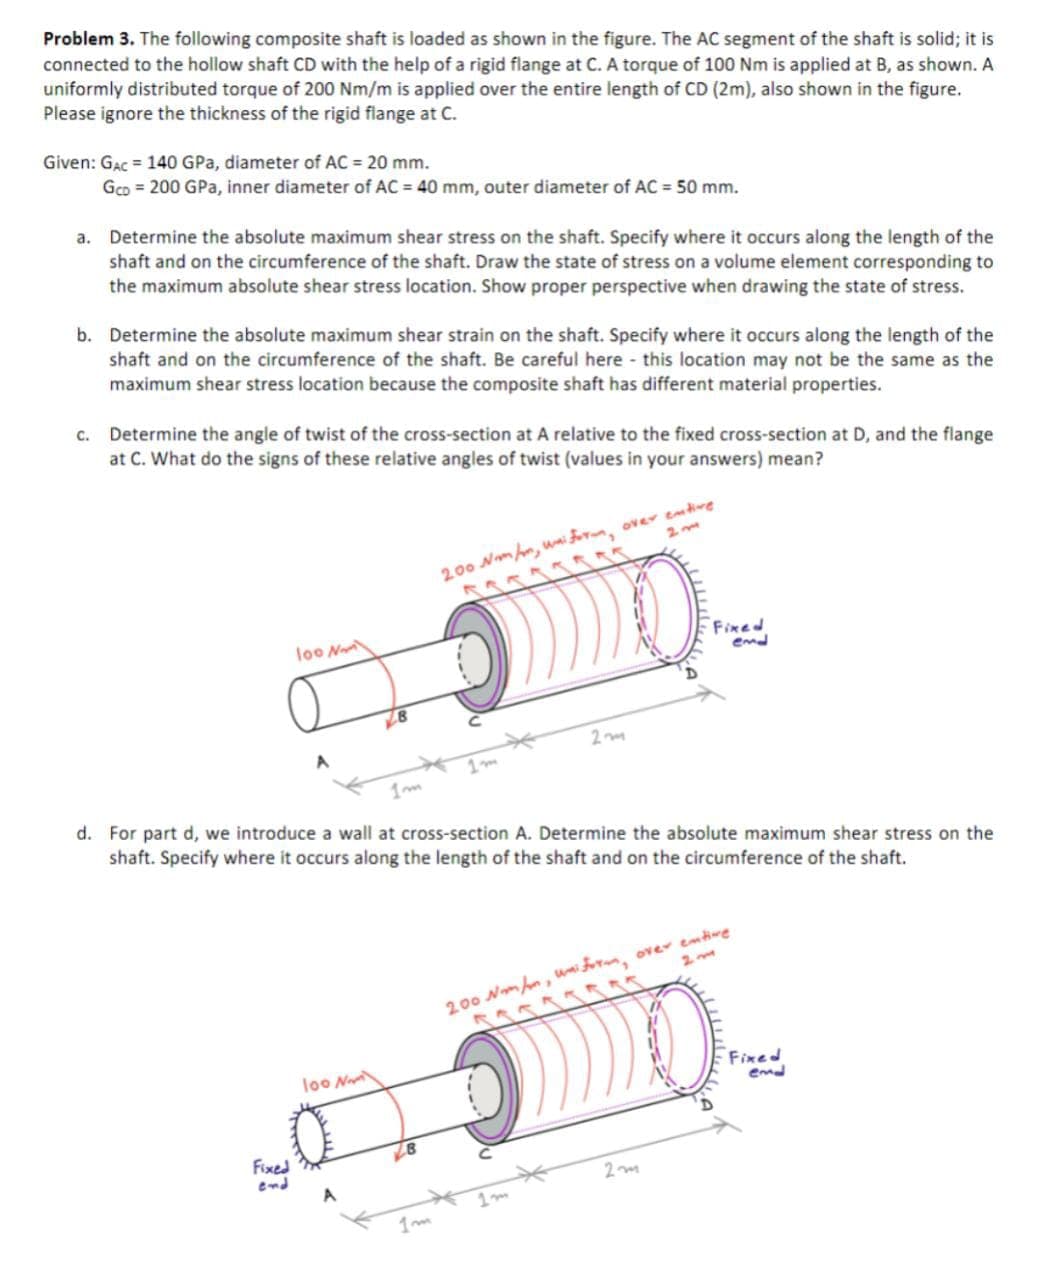 Problem 3. The following composite shaft is loaded as shown in the figure. The AC segment of the shaft is solid; it is
connected to the hollow shaft CD with the help of a rigid flange at C. A torque of 100 Nm is applied at B, as shown. A
uniformly distributed torque of 200 Nm/m is applied over the entire length of CD (2m), also shown in the figure.
Please ignore the thickness of the rigid flange at C.
Given: GAC = 140 GPa, diameter of AC = 20 mm.
Gco = 200 GPa, inner diameter of AC = 40 mm, outer diameter of AC = 50 mm.
a. Determine the absolute maximum shear stress on the shaft. Specify where it occurs along the length of the
shaft and on the circumference of the shaft. Draw the state of stress on a volume element corresponding to
the maximum absolute shear stress location. Show proper perspective when drawing the state of stress.
b. Determine the absolute maximum shear strain on the shaft. Specify where it occurs along the length of the
shaft and on the circumference of the shaft. Be careful here - this location may not be the same as the
maximum shear stress location because the composite shaft has different material properties.
c. Determine the angle of twist of the cross-section at A relative to the fixed cross-section at D, and the flange
at C. What do the signs of these relative angles of twist (values in your answers) mean?
200 Nmhm, wnifo, over emtire
loo N
Fixed
emd
d. For part d, we introduce a wall at cross-section A. Determine the absolute maximum shear stress on the
shaft. Specify where it occurs along the length of the shaft and on the circumference of the shaft.
2 me
200 Nm hn, uni , over emtwe
loo N
Fixed
emd
Fixed
end
1m
